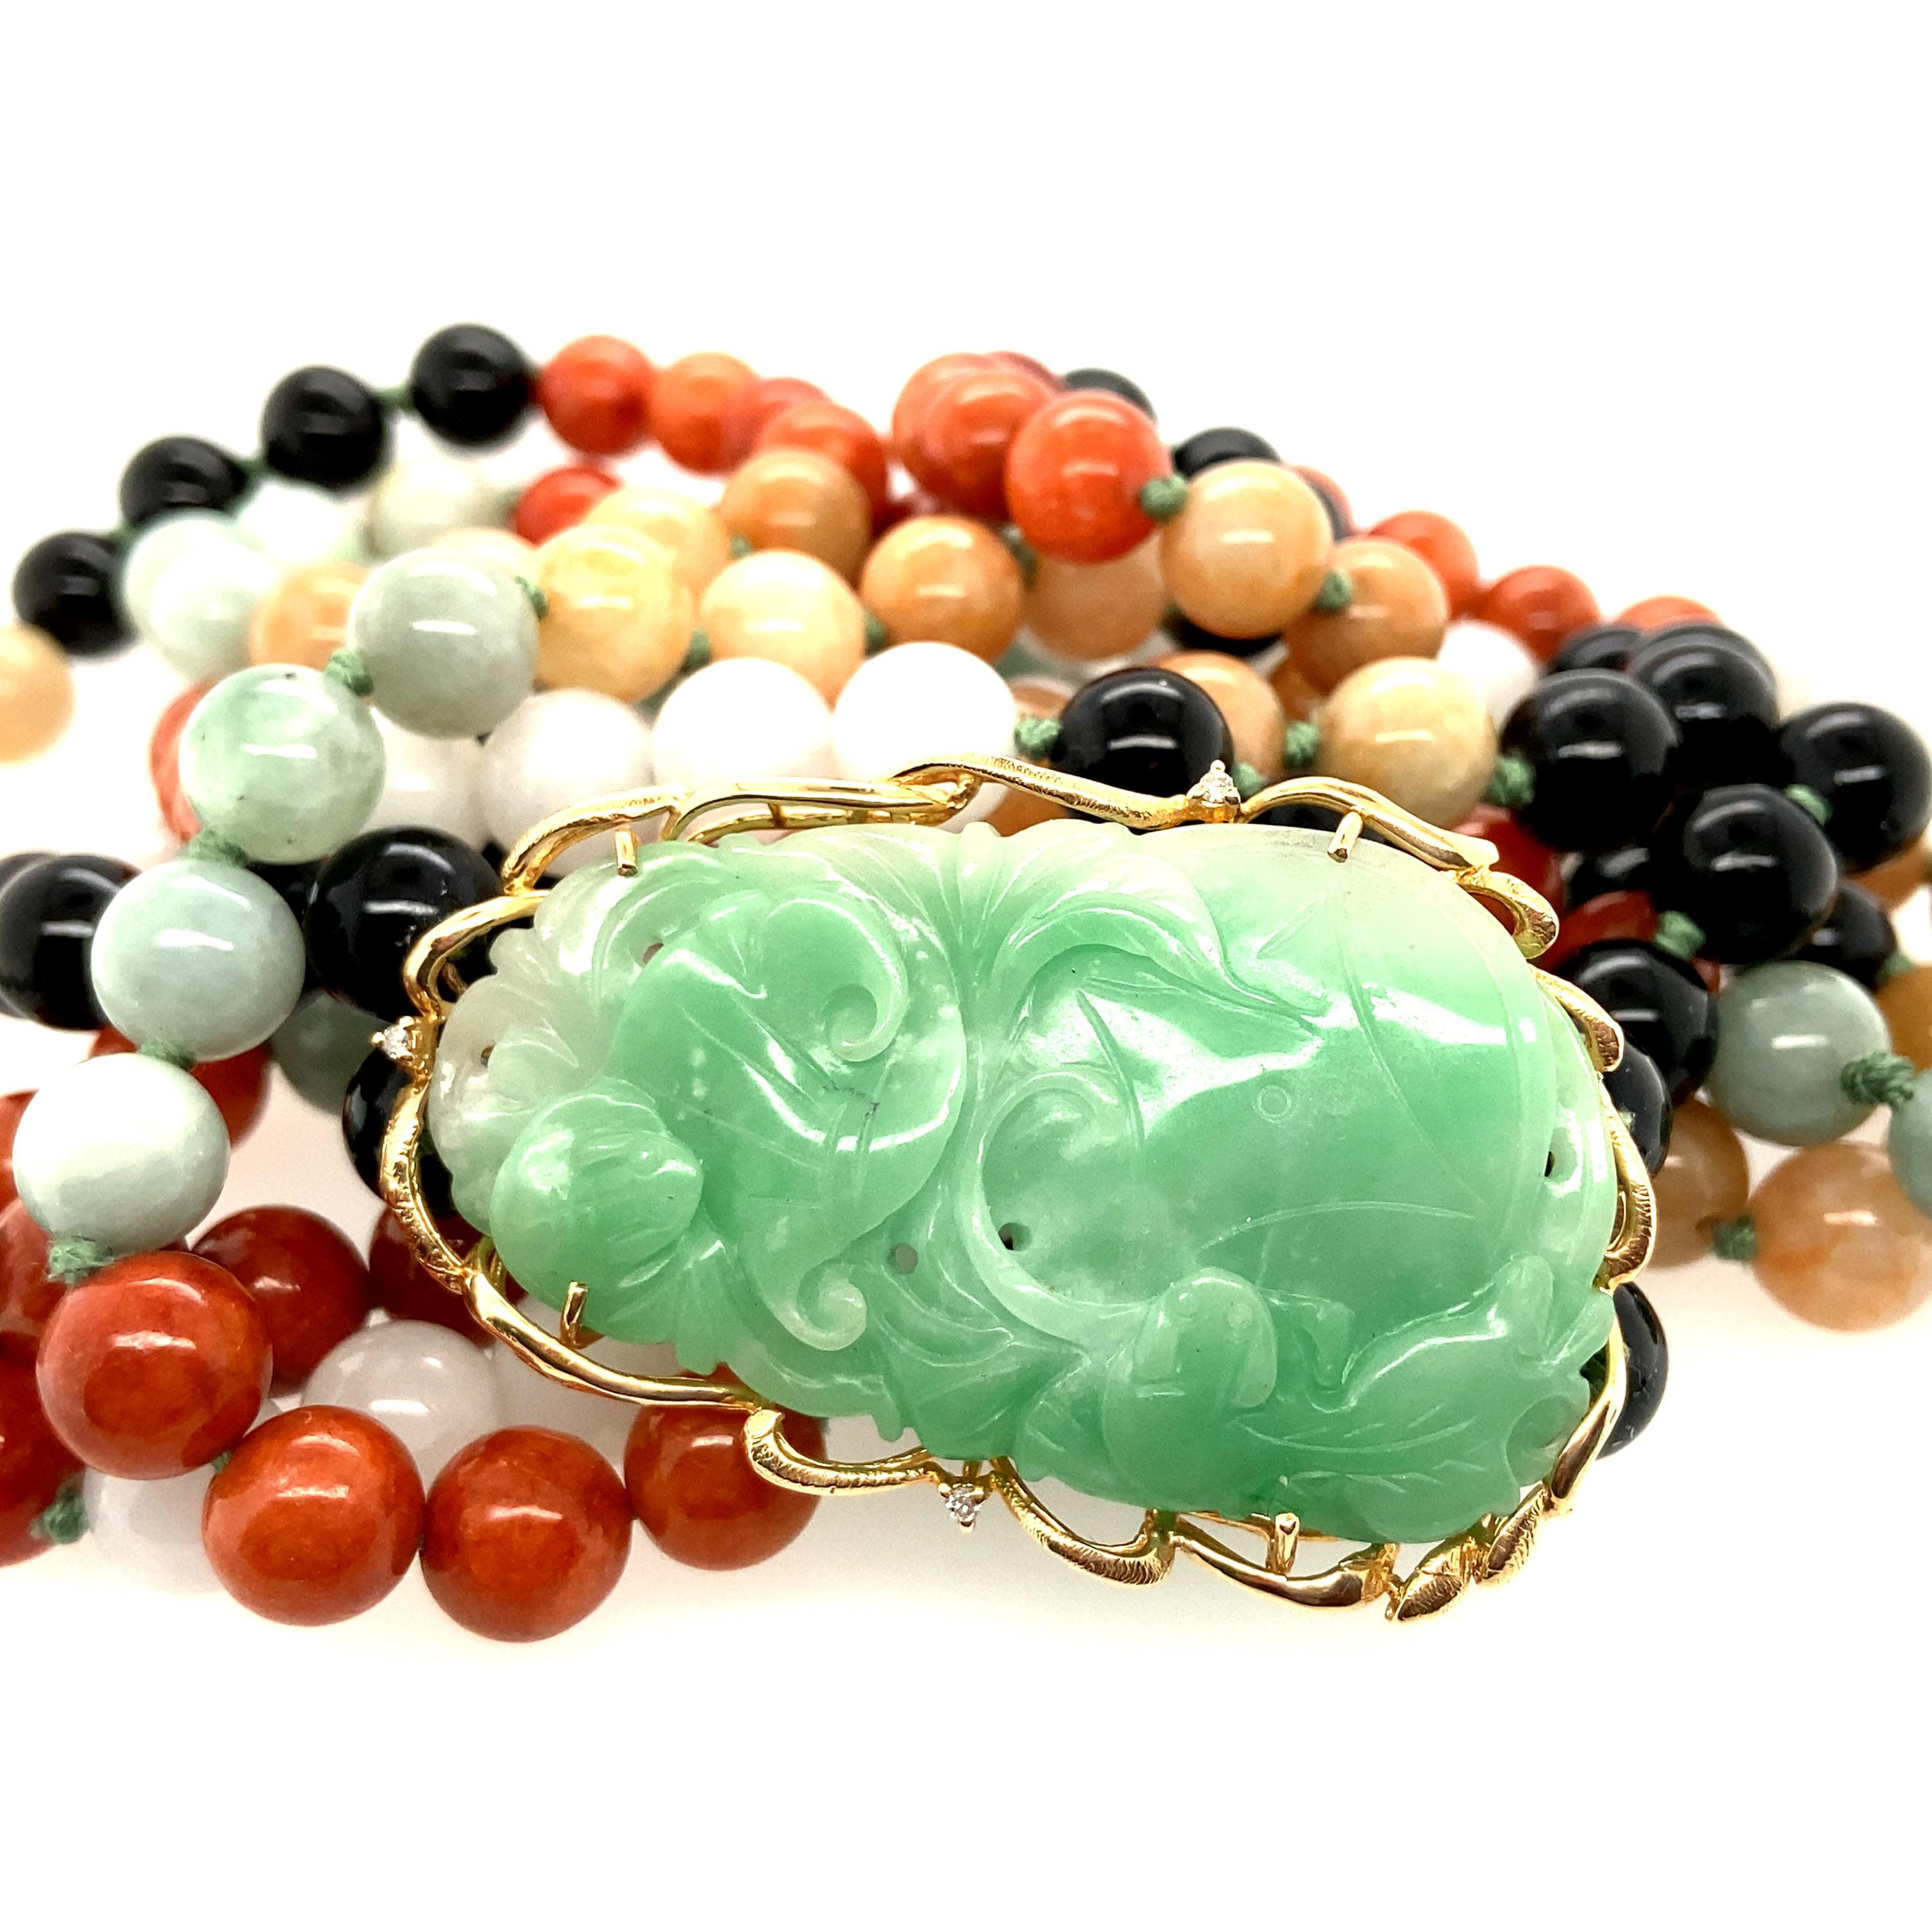 Women's or Men's 14K Yellow Gold Multicolored Jadeite Jade Bead Necklace With Carved Coy Station